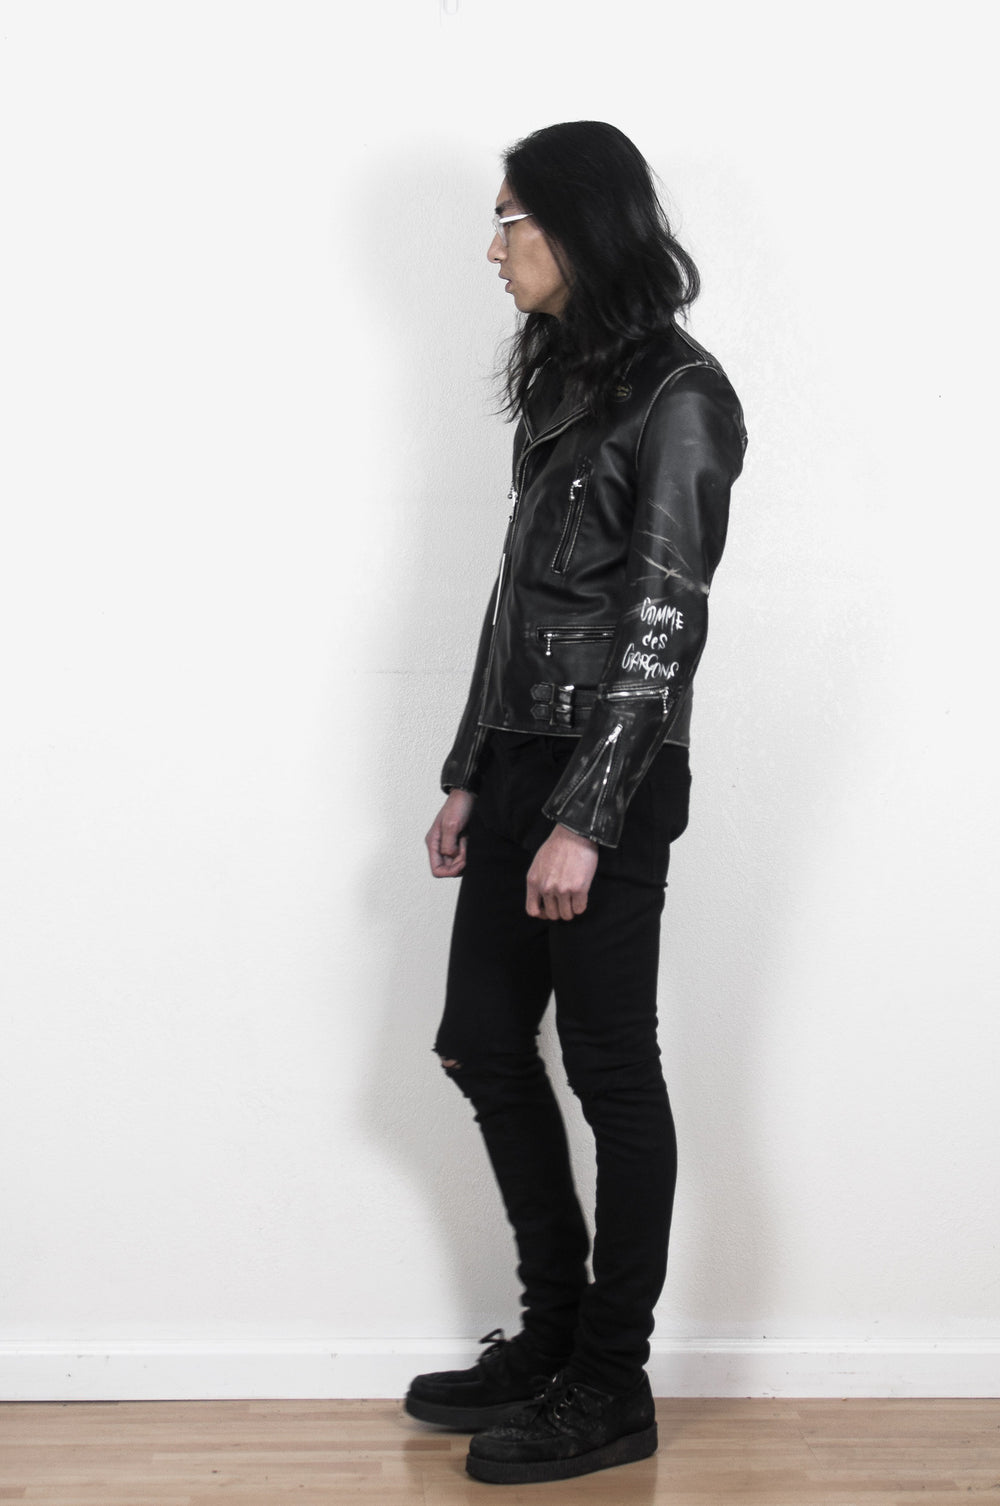 Comme des Garçons x Lewis Leathers Live Free Die Strong Lightning Rider